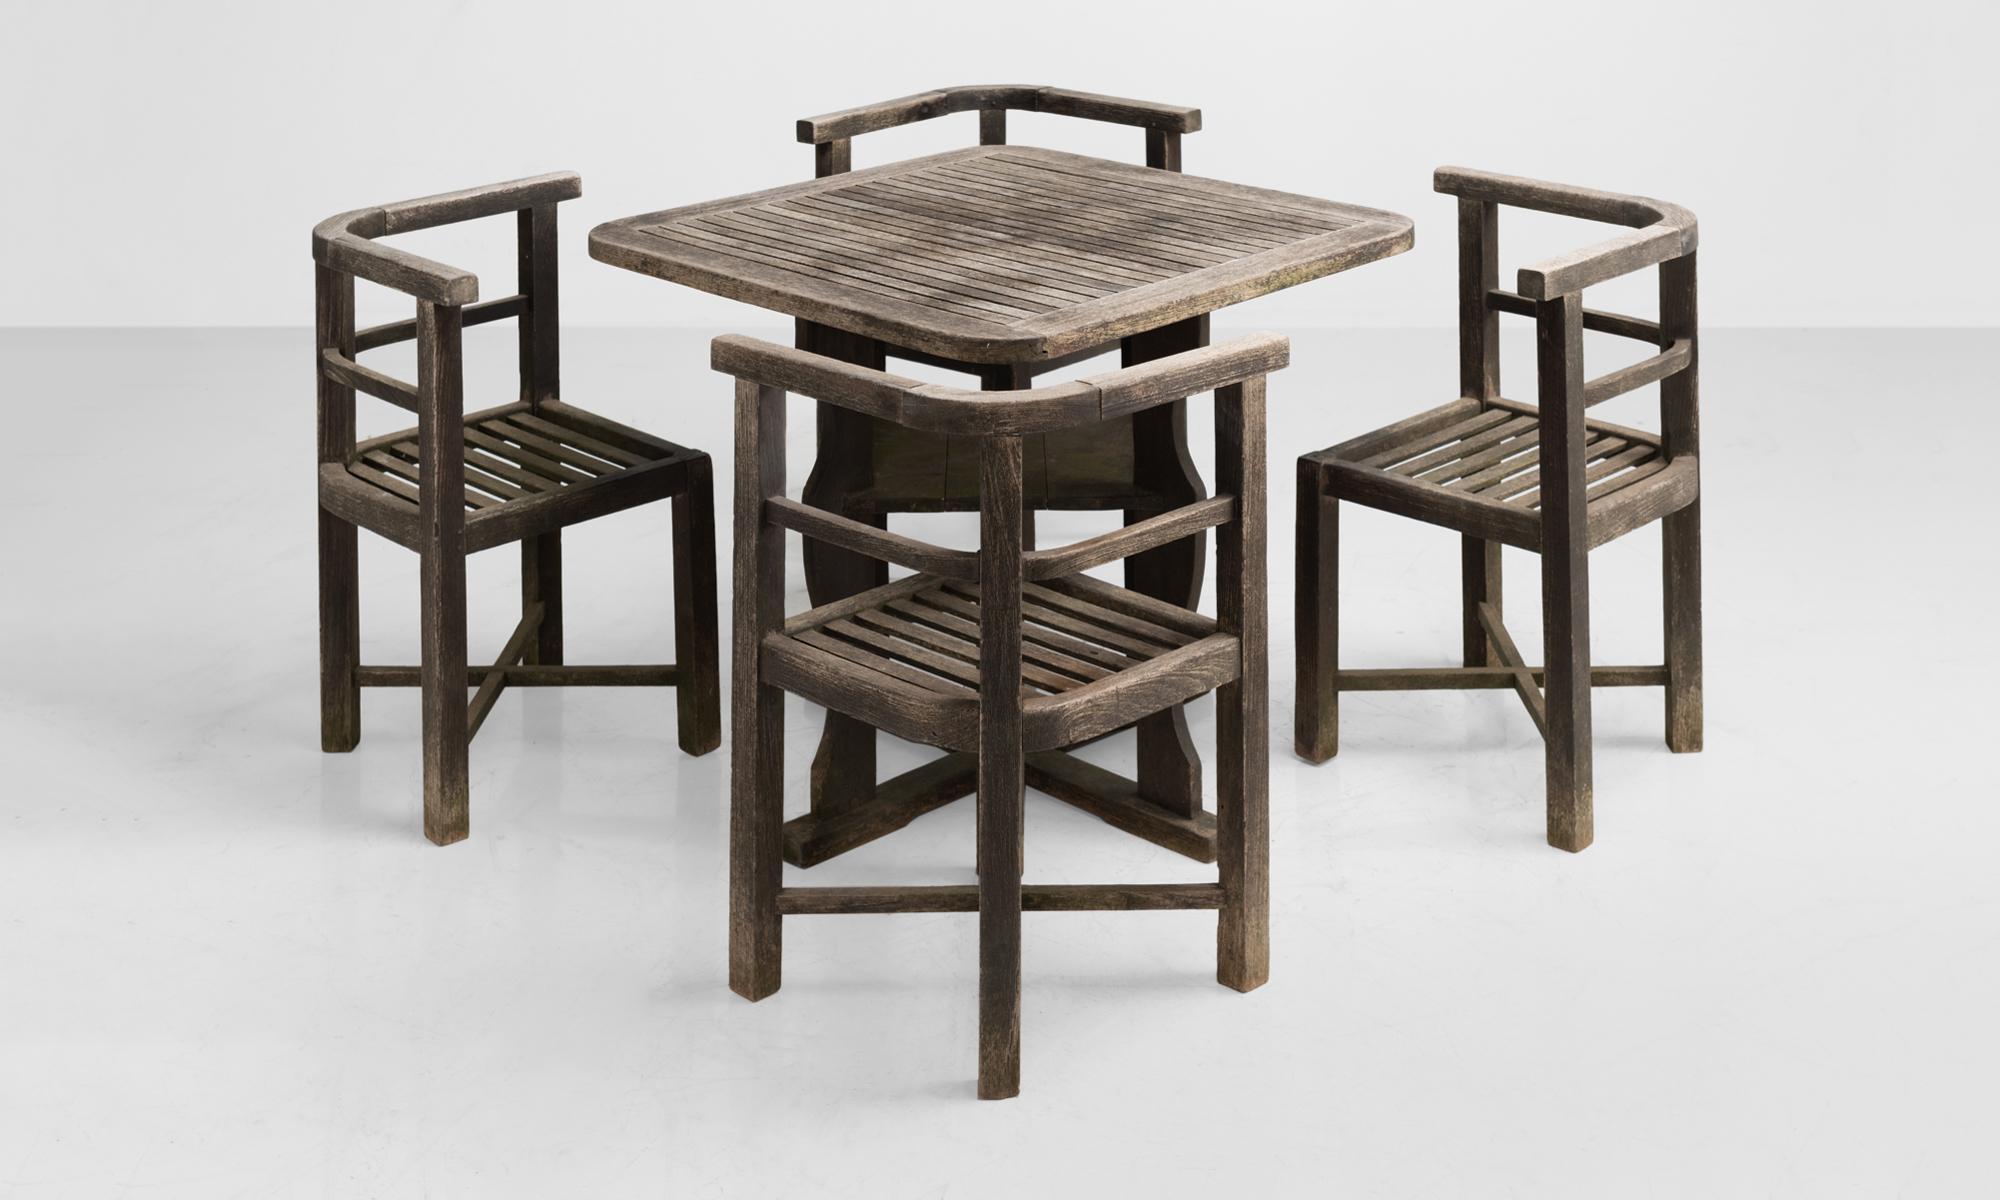 Heal's teak garden set, circa 1930.

Slatted tabletop on vase shaped legs, with four corner chairs.